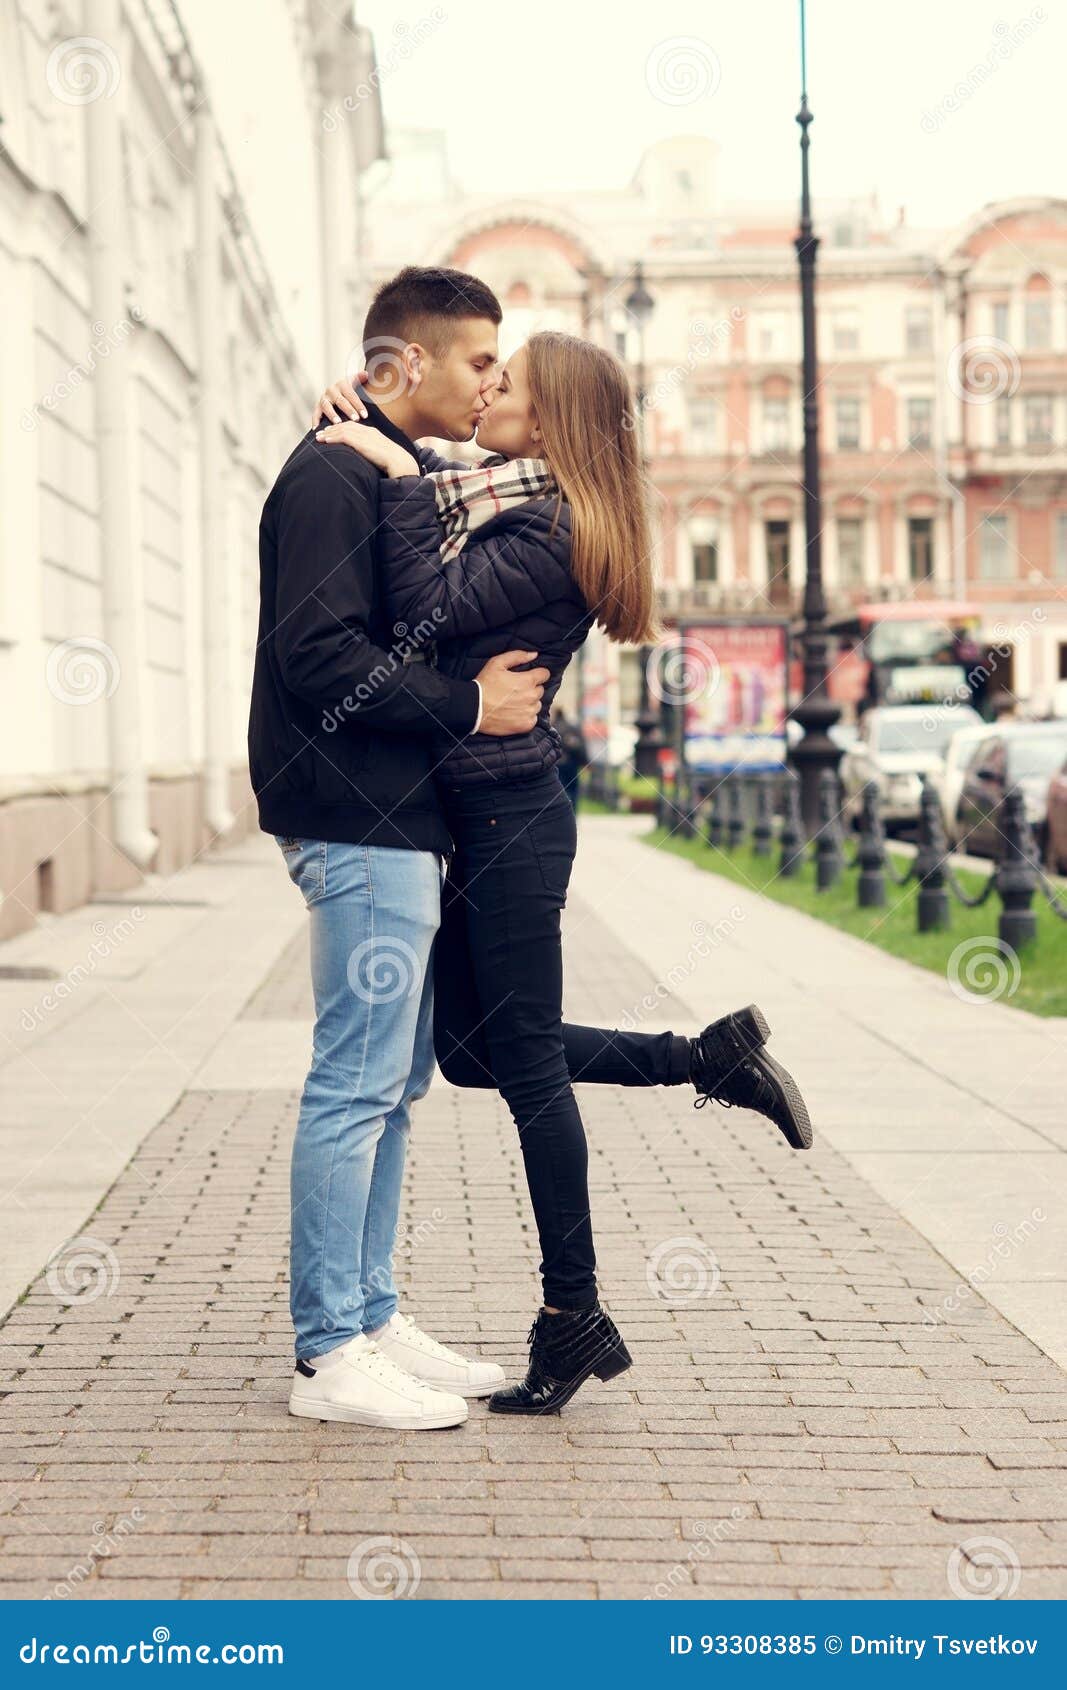 Couple kissing at street stock image. Image of outdoors - 93308385